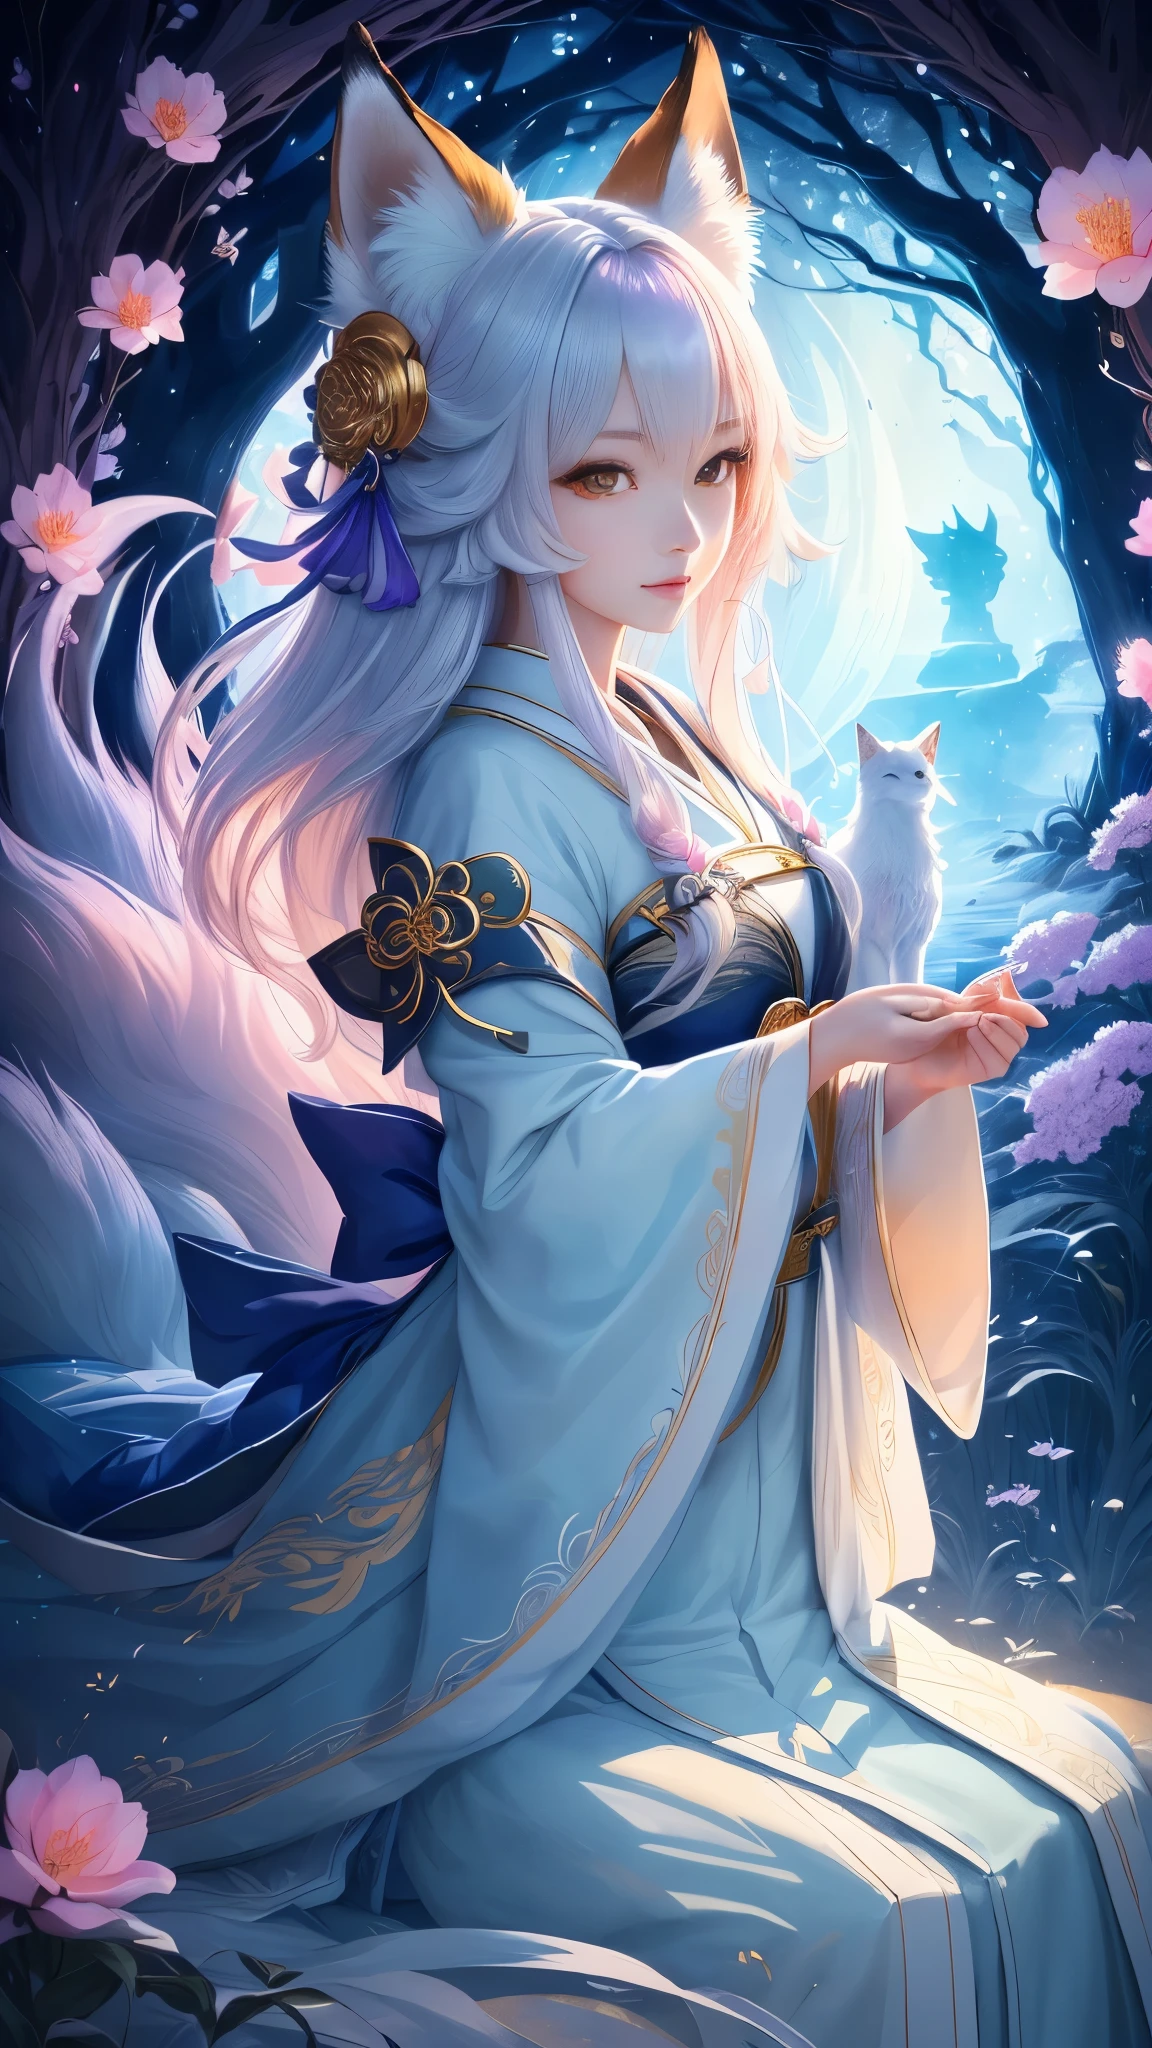 masterpiece , best quality, Close-up, masterpiece, beautiful details, colorful, delicate details, delicate lips, intricate details, genuine, ultrargenuineista, Girl with multicolored haired fox sitting on a branch:cute, light makeup, ,Colorful Fox, raposa de nine tails, Three tails Fox, Three tails Fox, onmyoji detailed art, beautiful fine art illustration, mythical creatures, Fox, beautiful digital art,shrine maiden,japanese architecture,hold hands,exquisite digital illustration, mizutsune, Inspired by mythical wild web creatures, pixiv in digital art, shining light, high contrast, Mysterious,Girl with multicolored haired fox sitting on a branch,front,looking at the camera